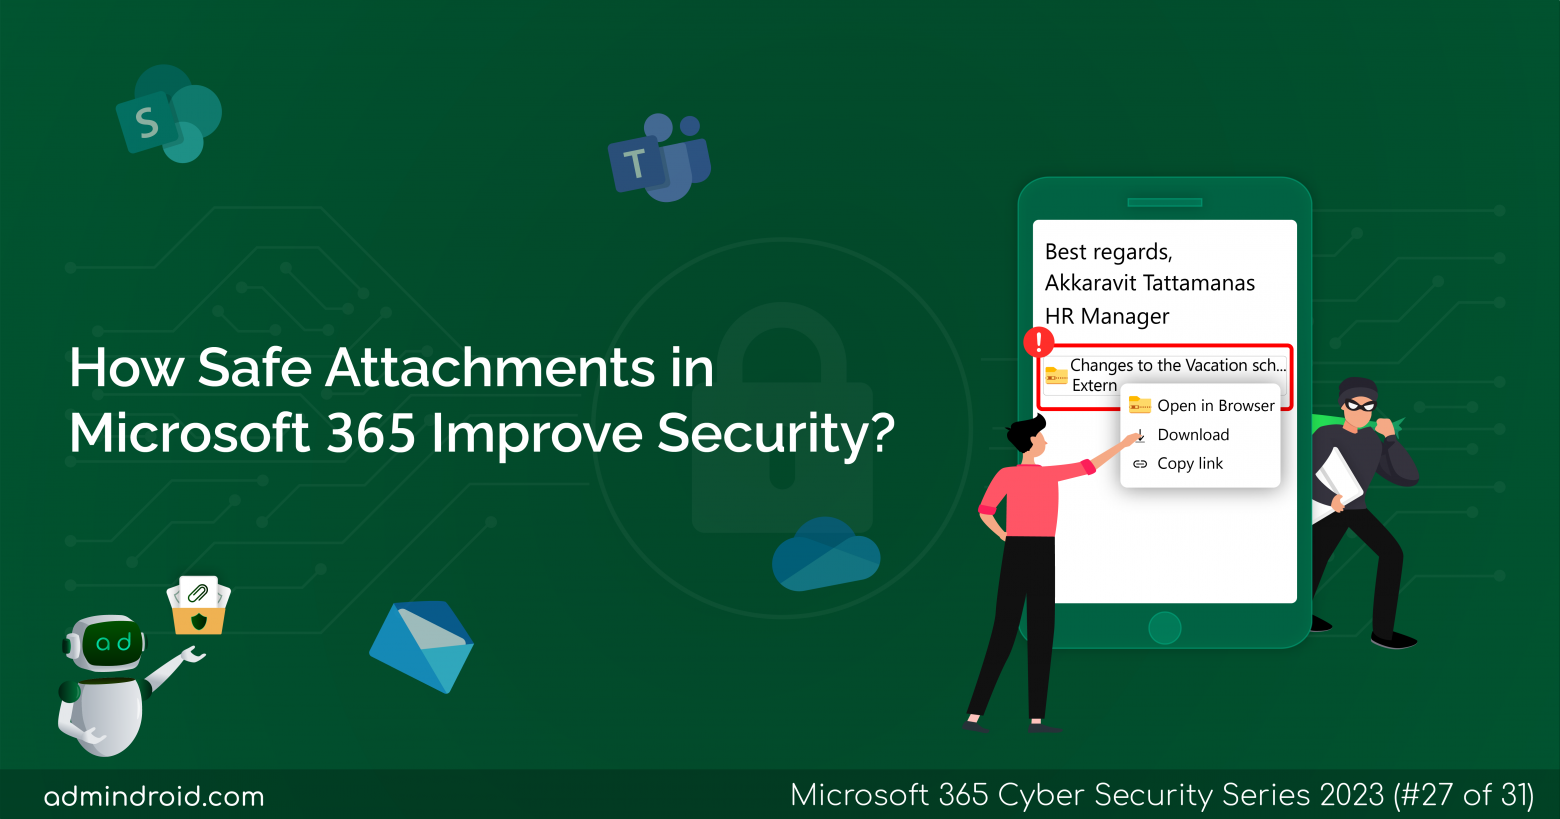 How Safe Attachments in Microsoft 365 Improve Security